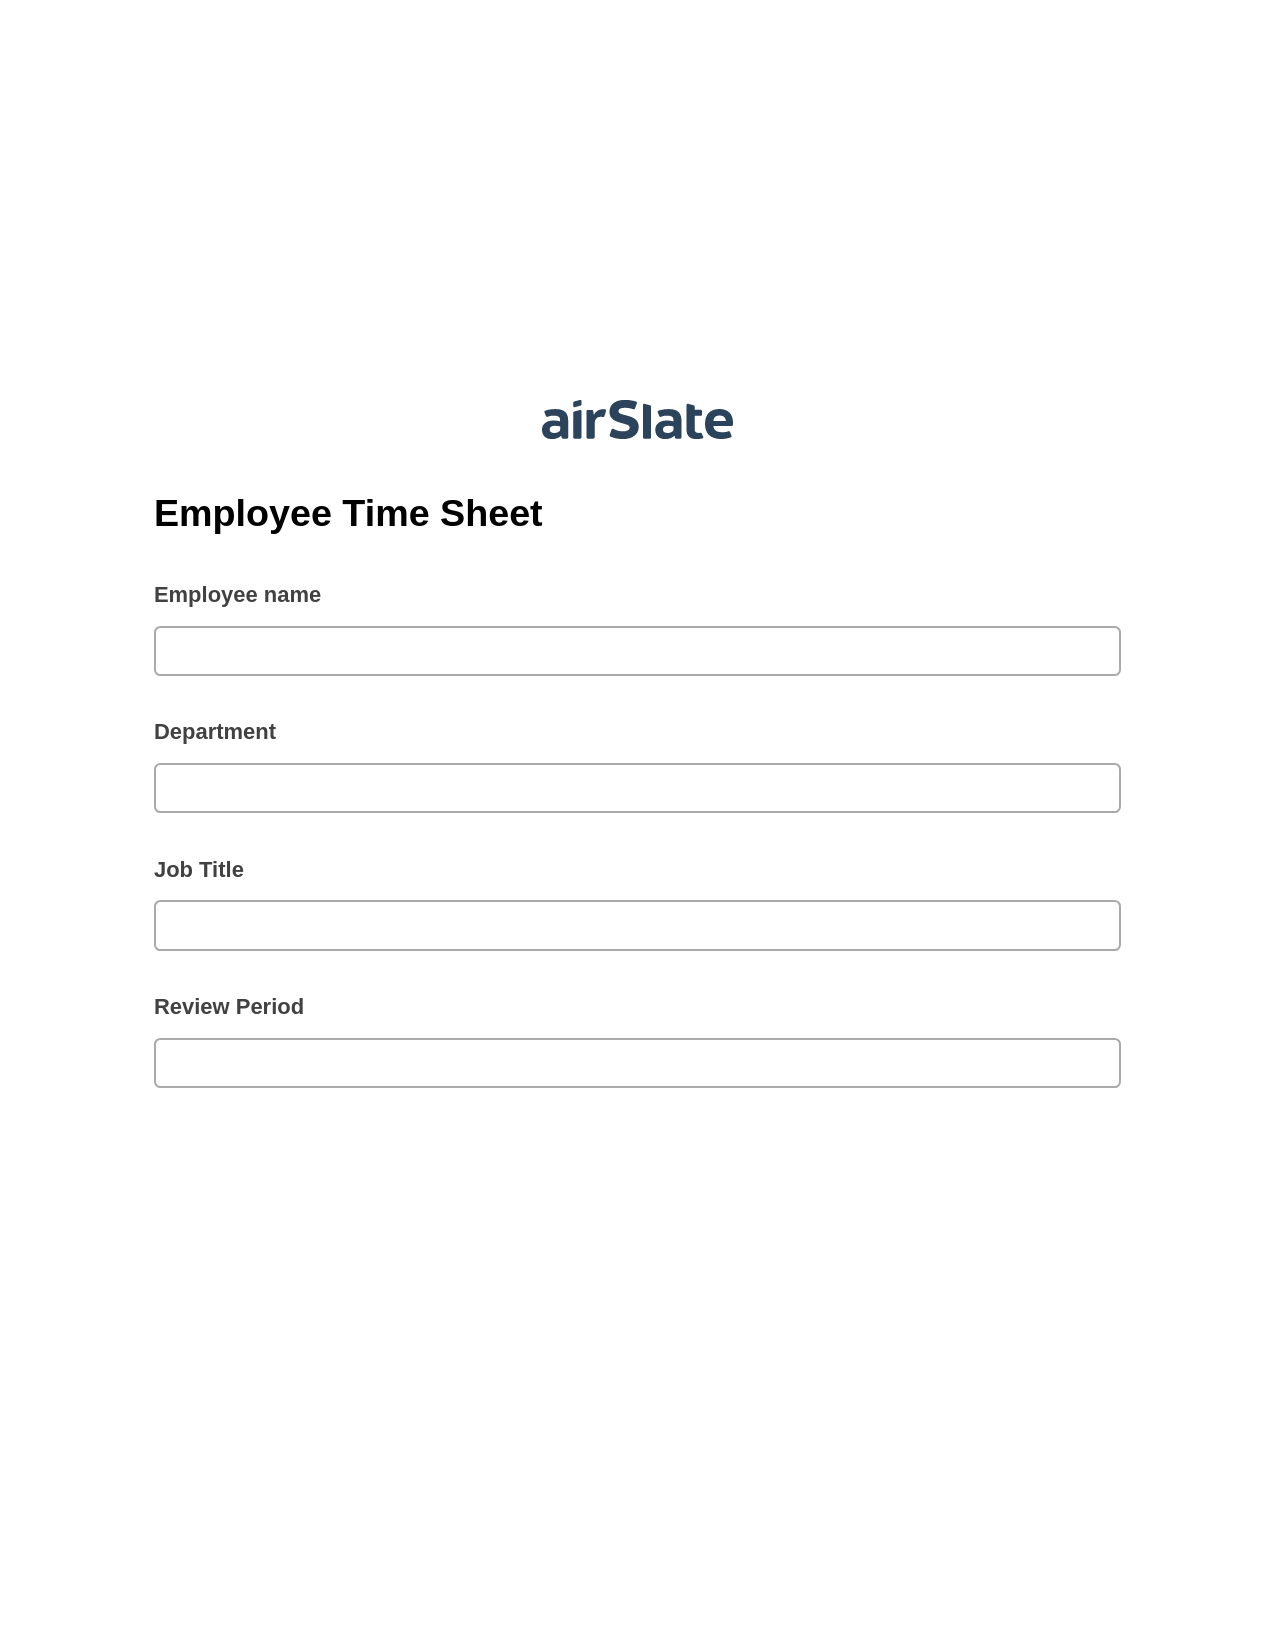 Employee Time Sheet Pre-fill from Excel Spreadsheet Bot, Update Audit Trail Bot, Archive to OneDrive Bot